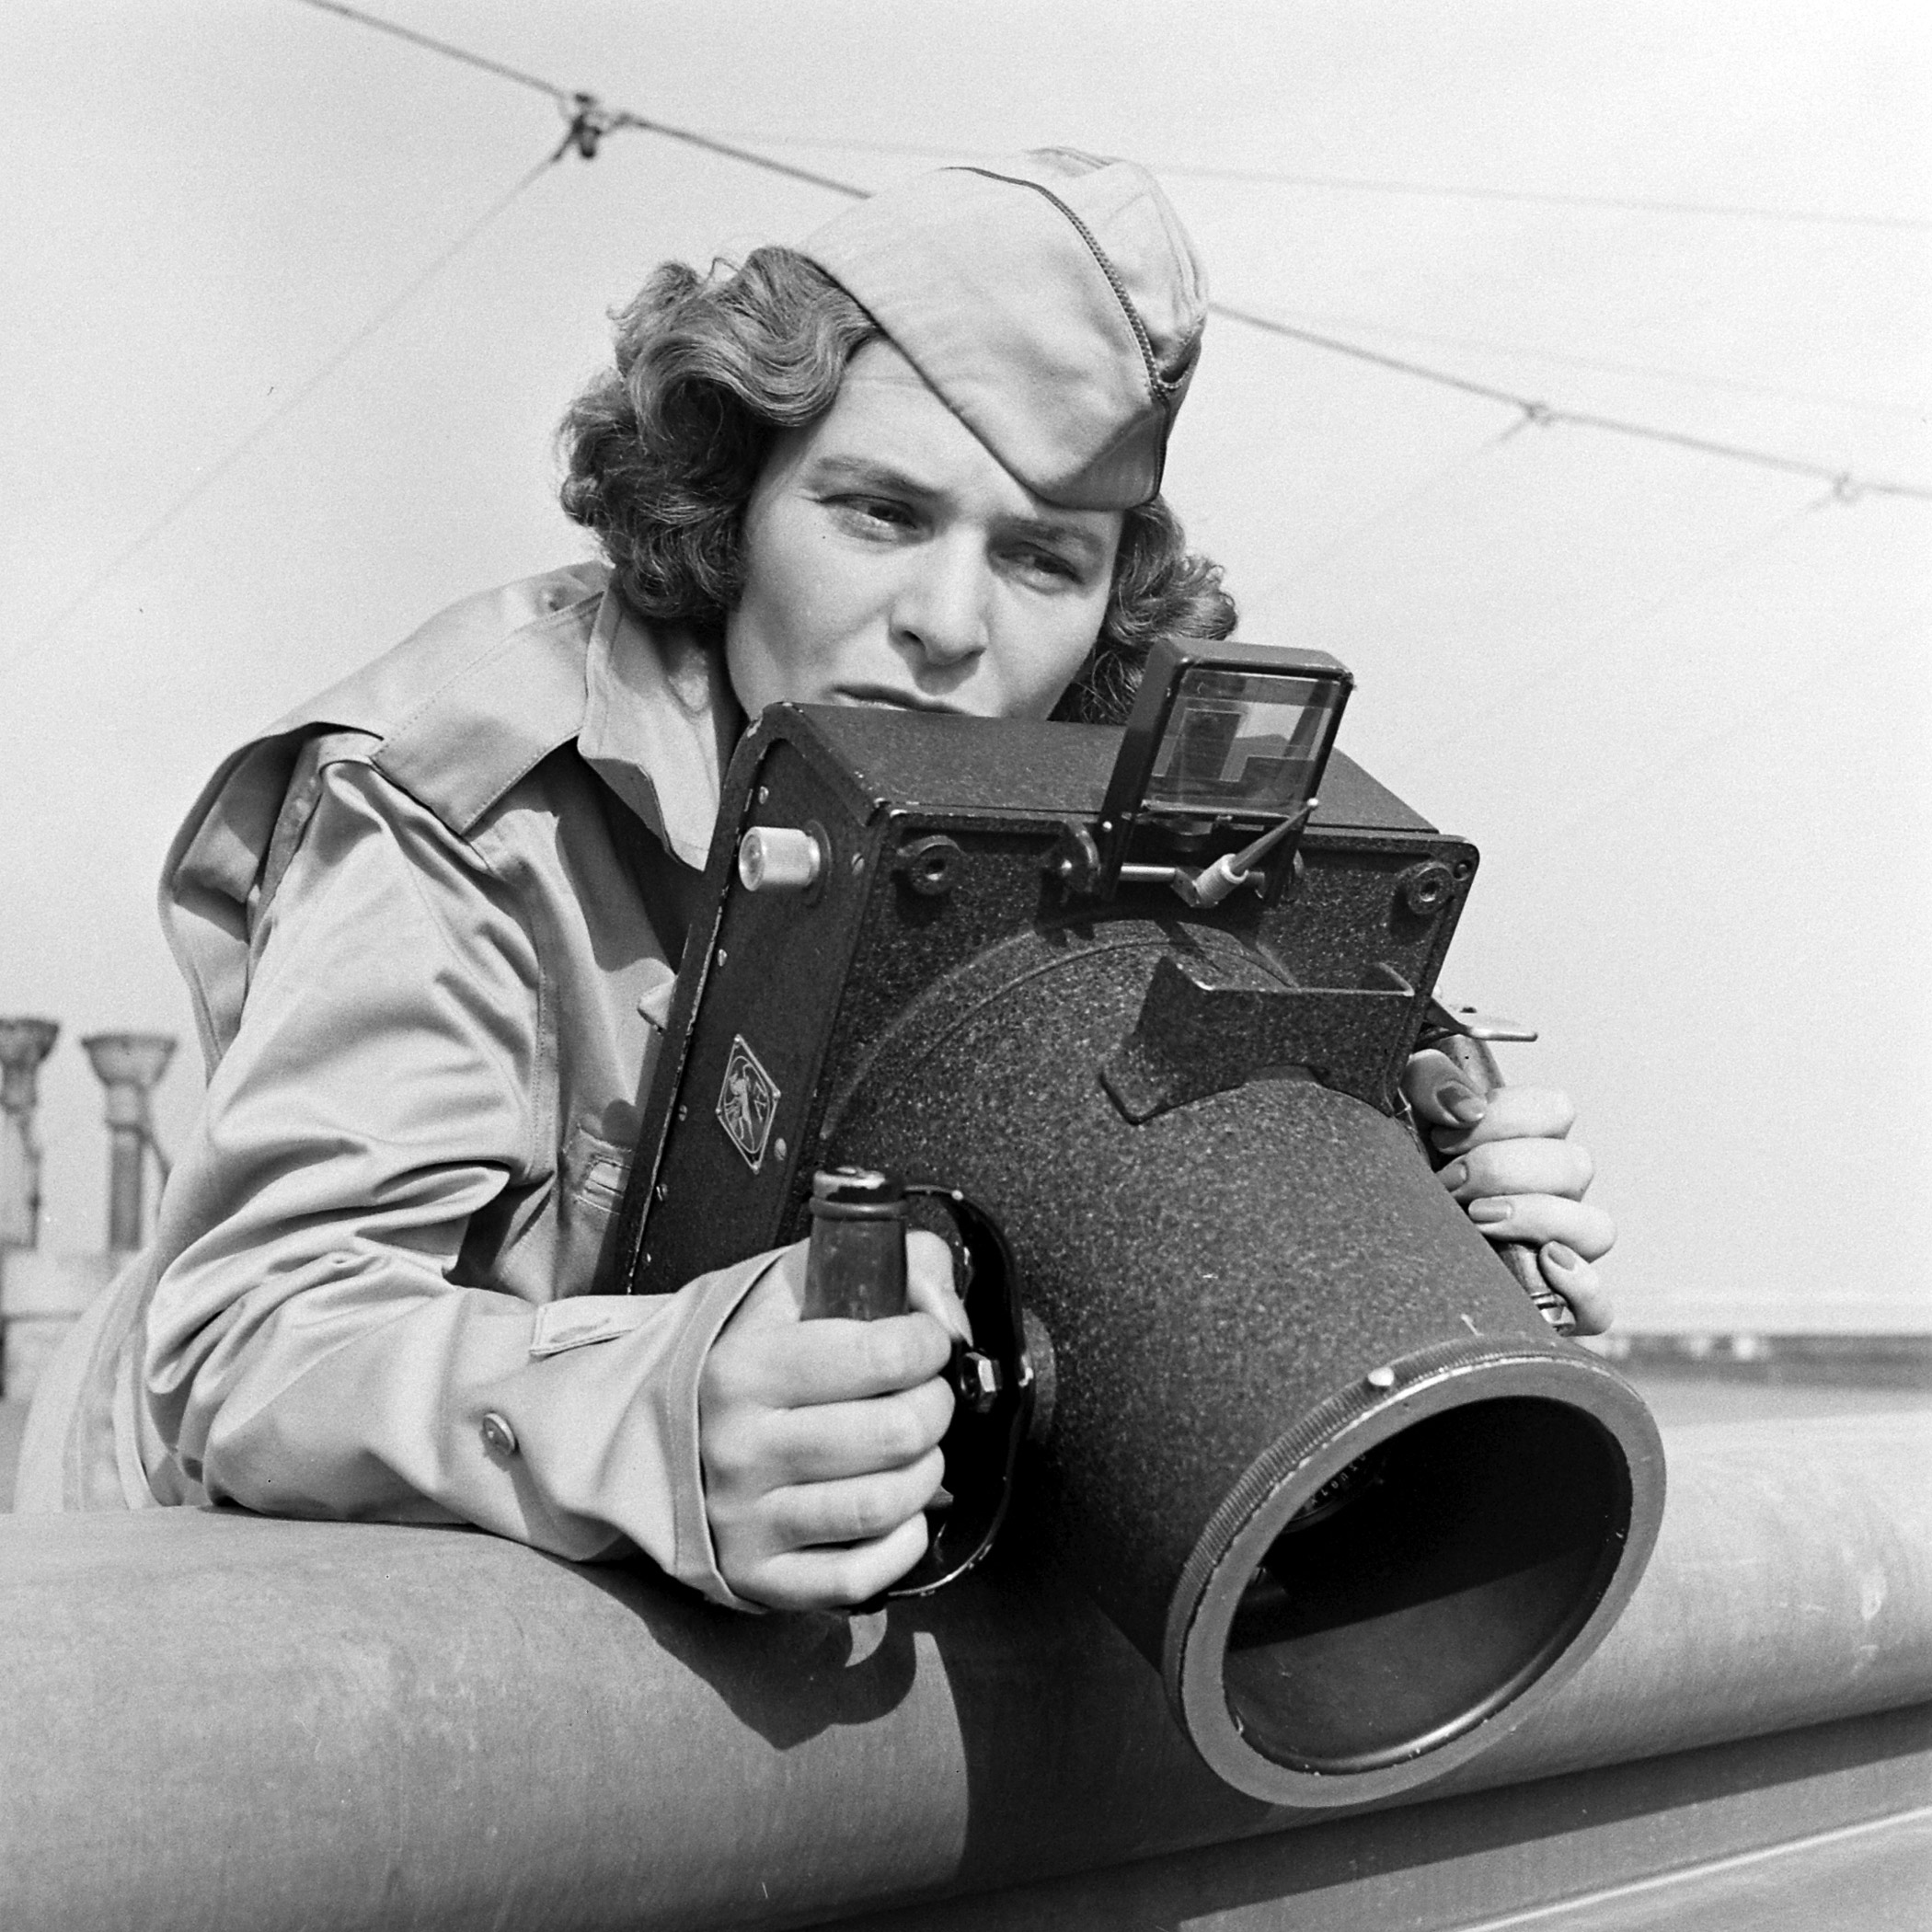 LIFE photographer Margaret Bourke-White and her camera.